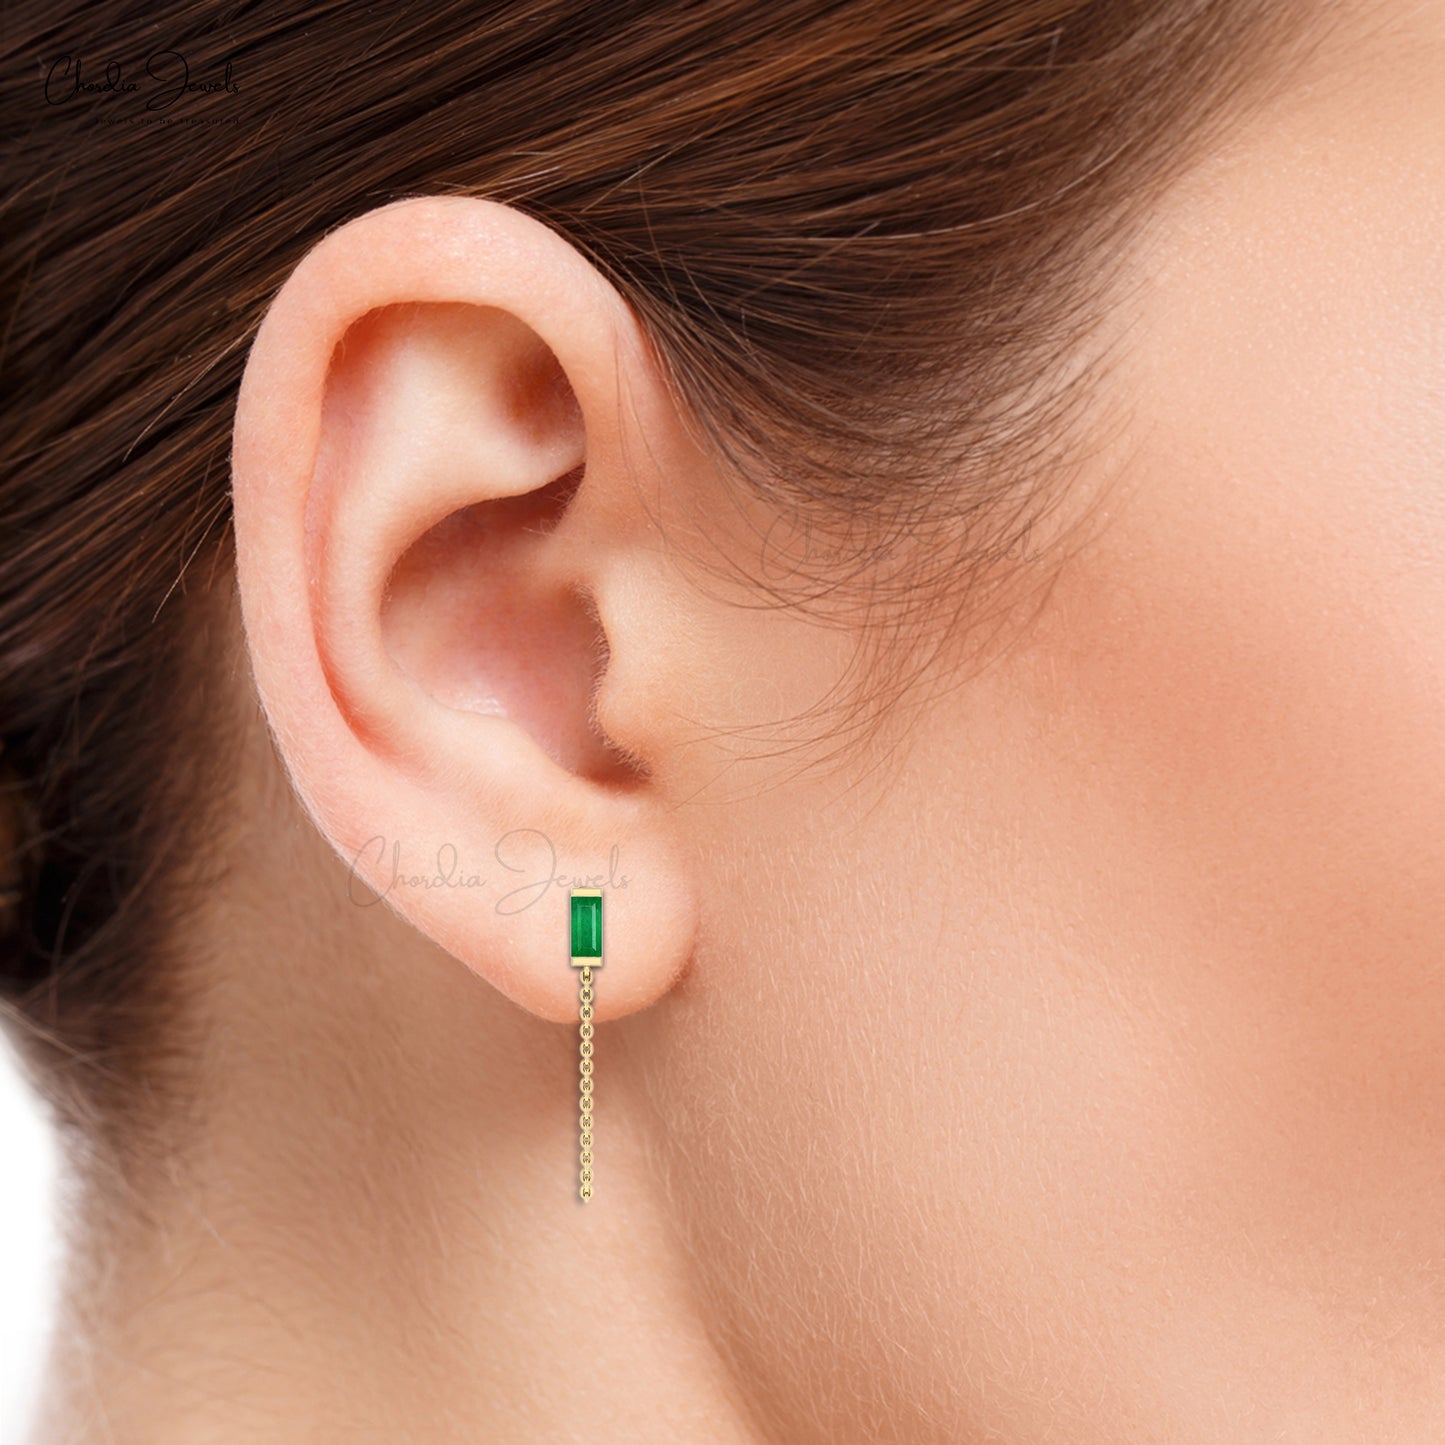 Celebrate your birthday with these may birthstone earrings